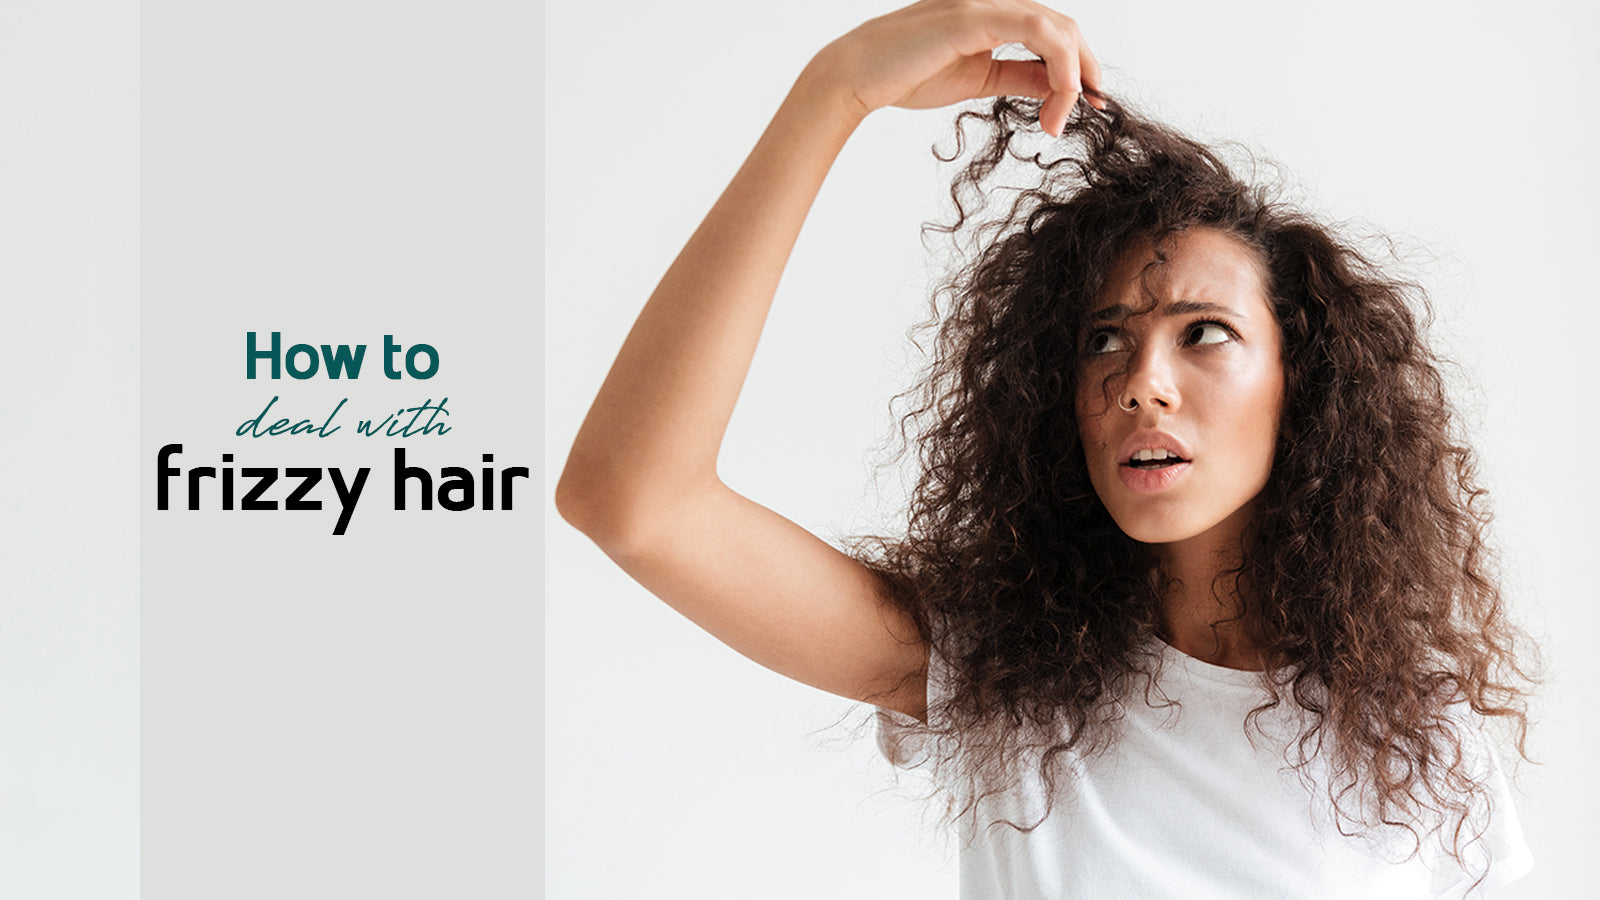 How to deal with frizzy hair?